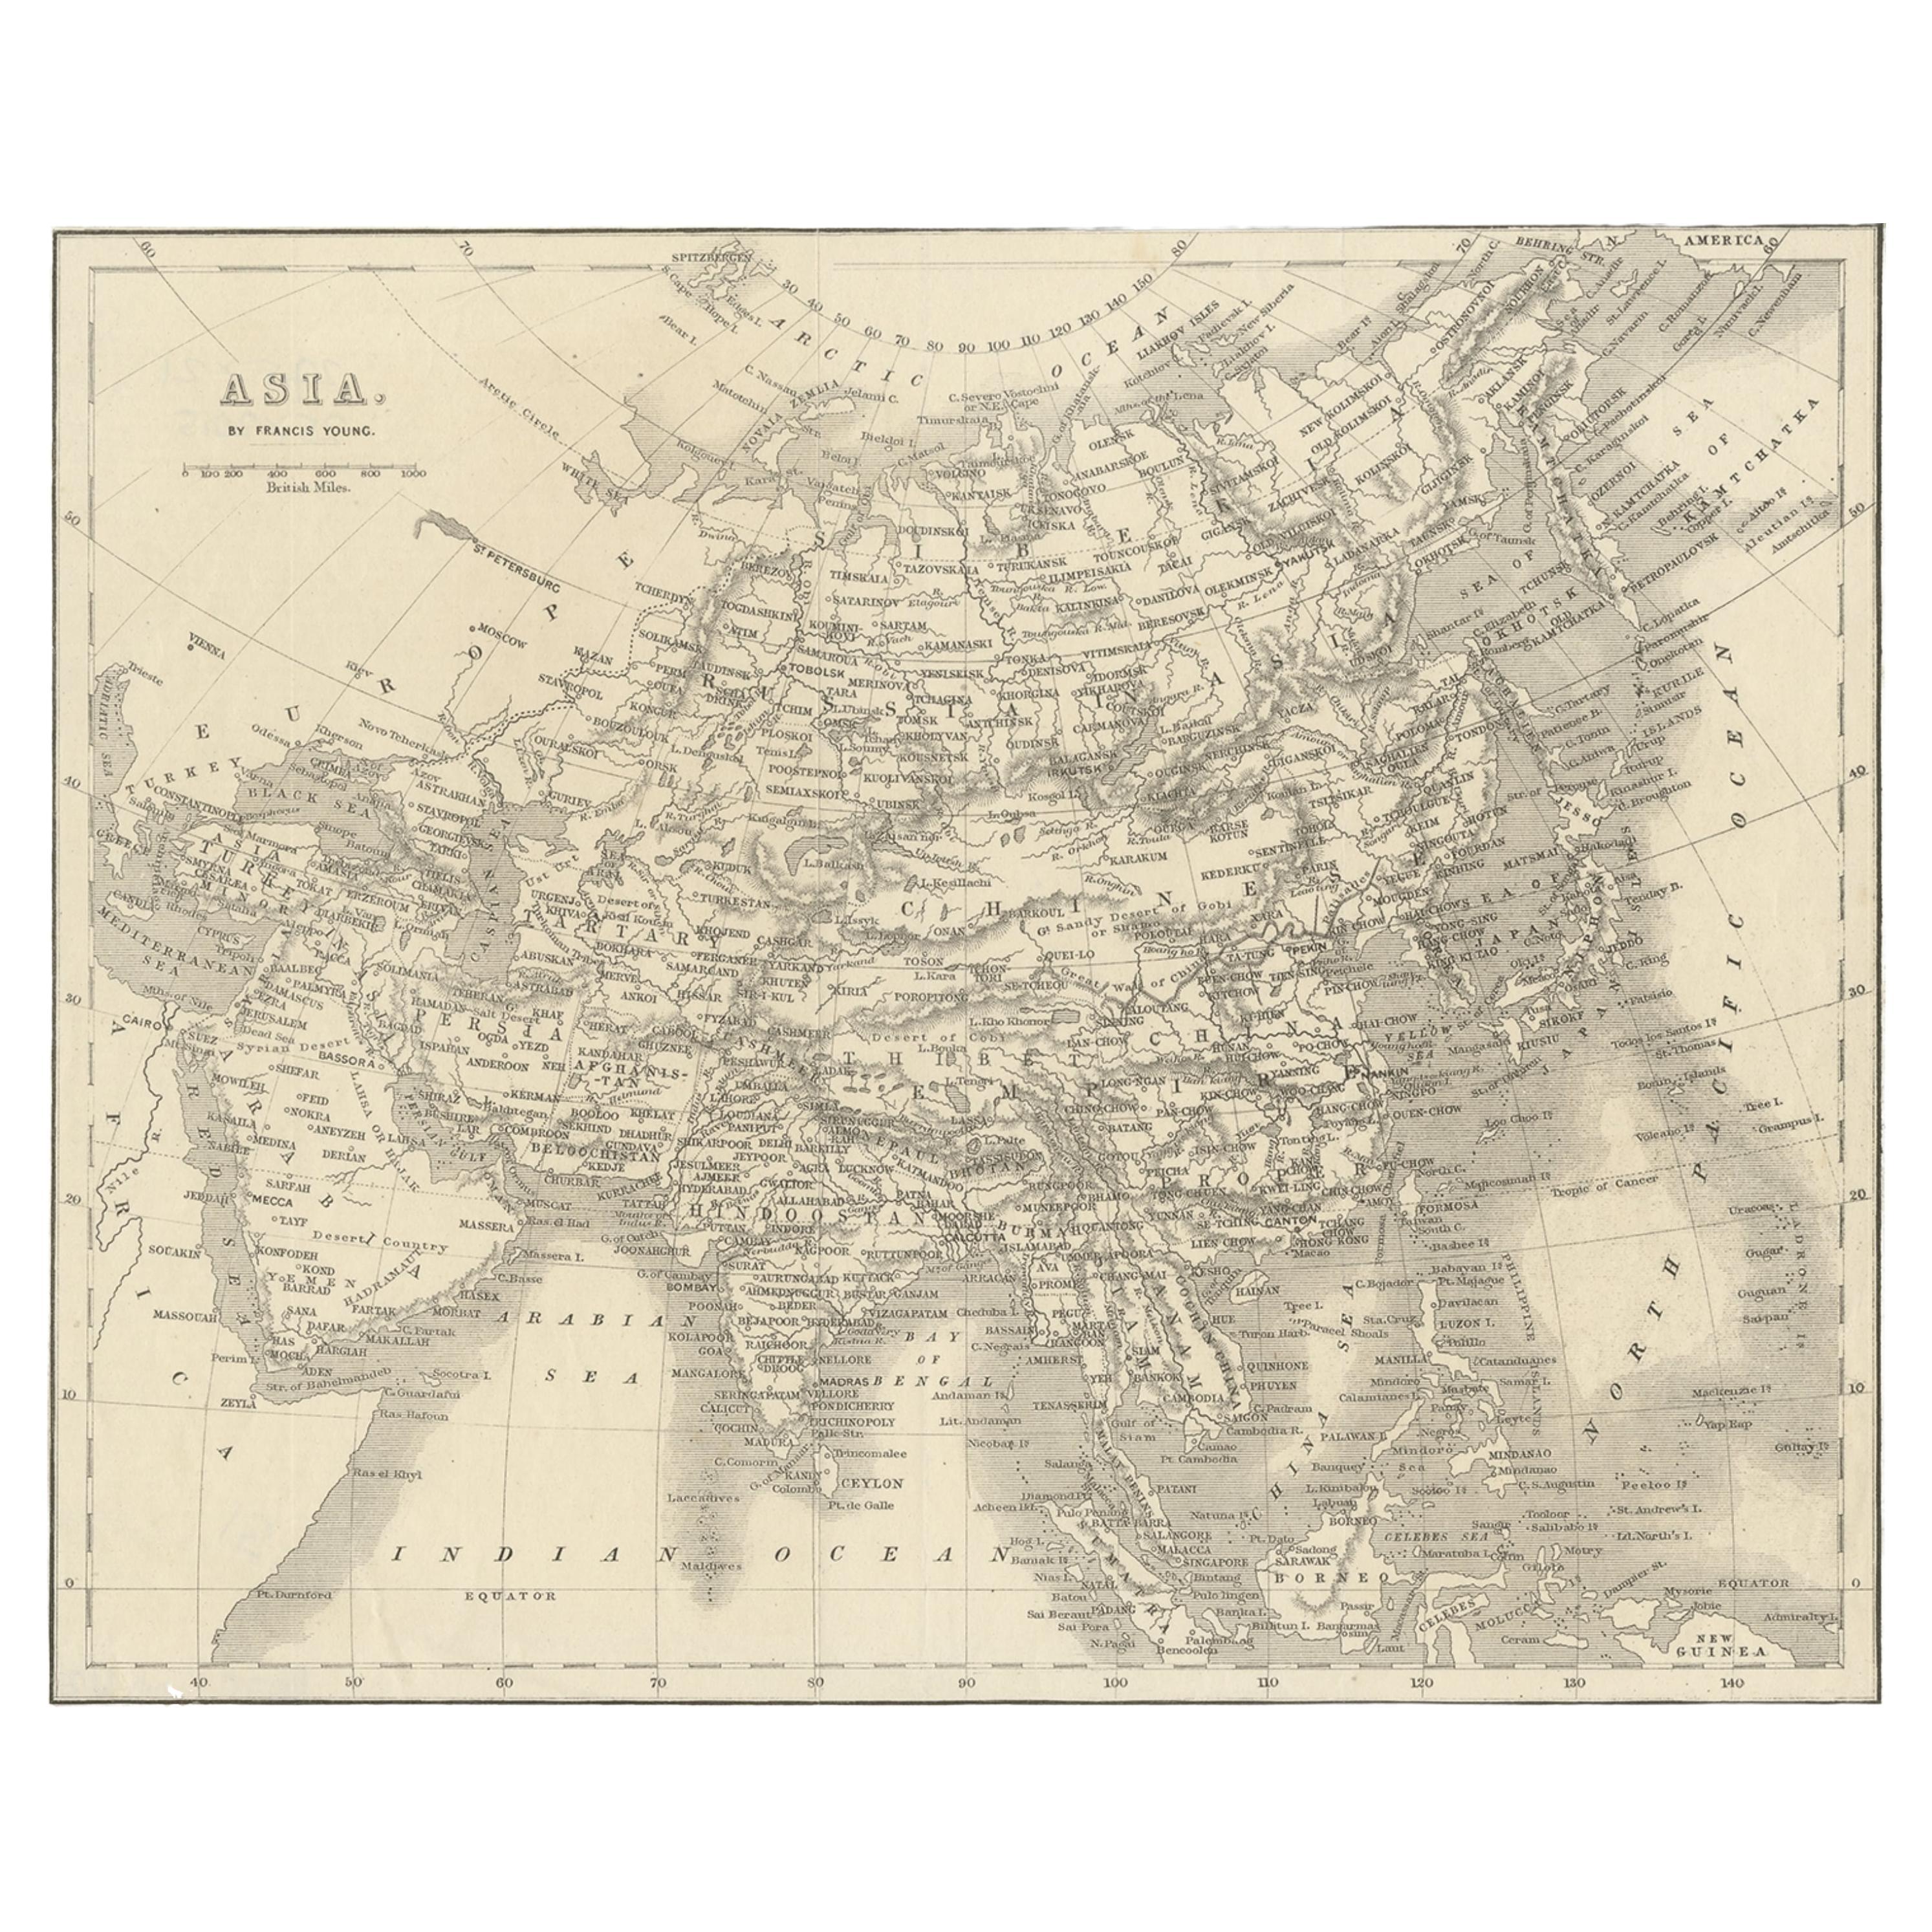 Antique Map of Asia by Young, c.1860